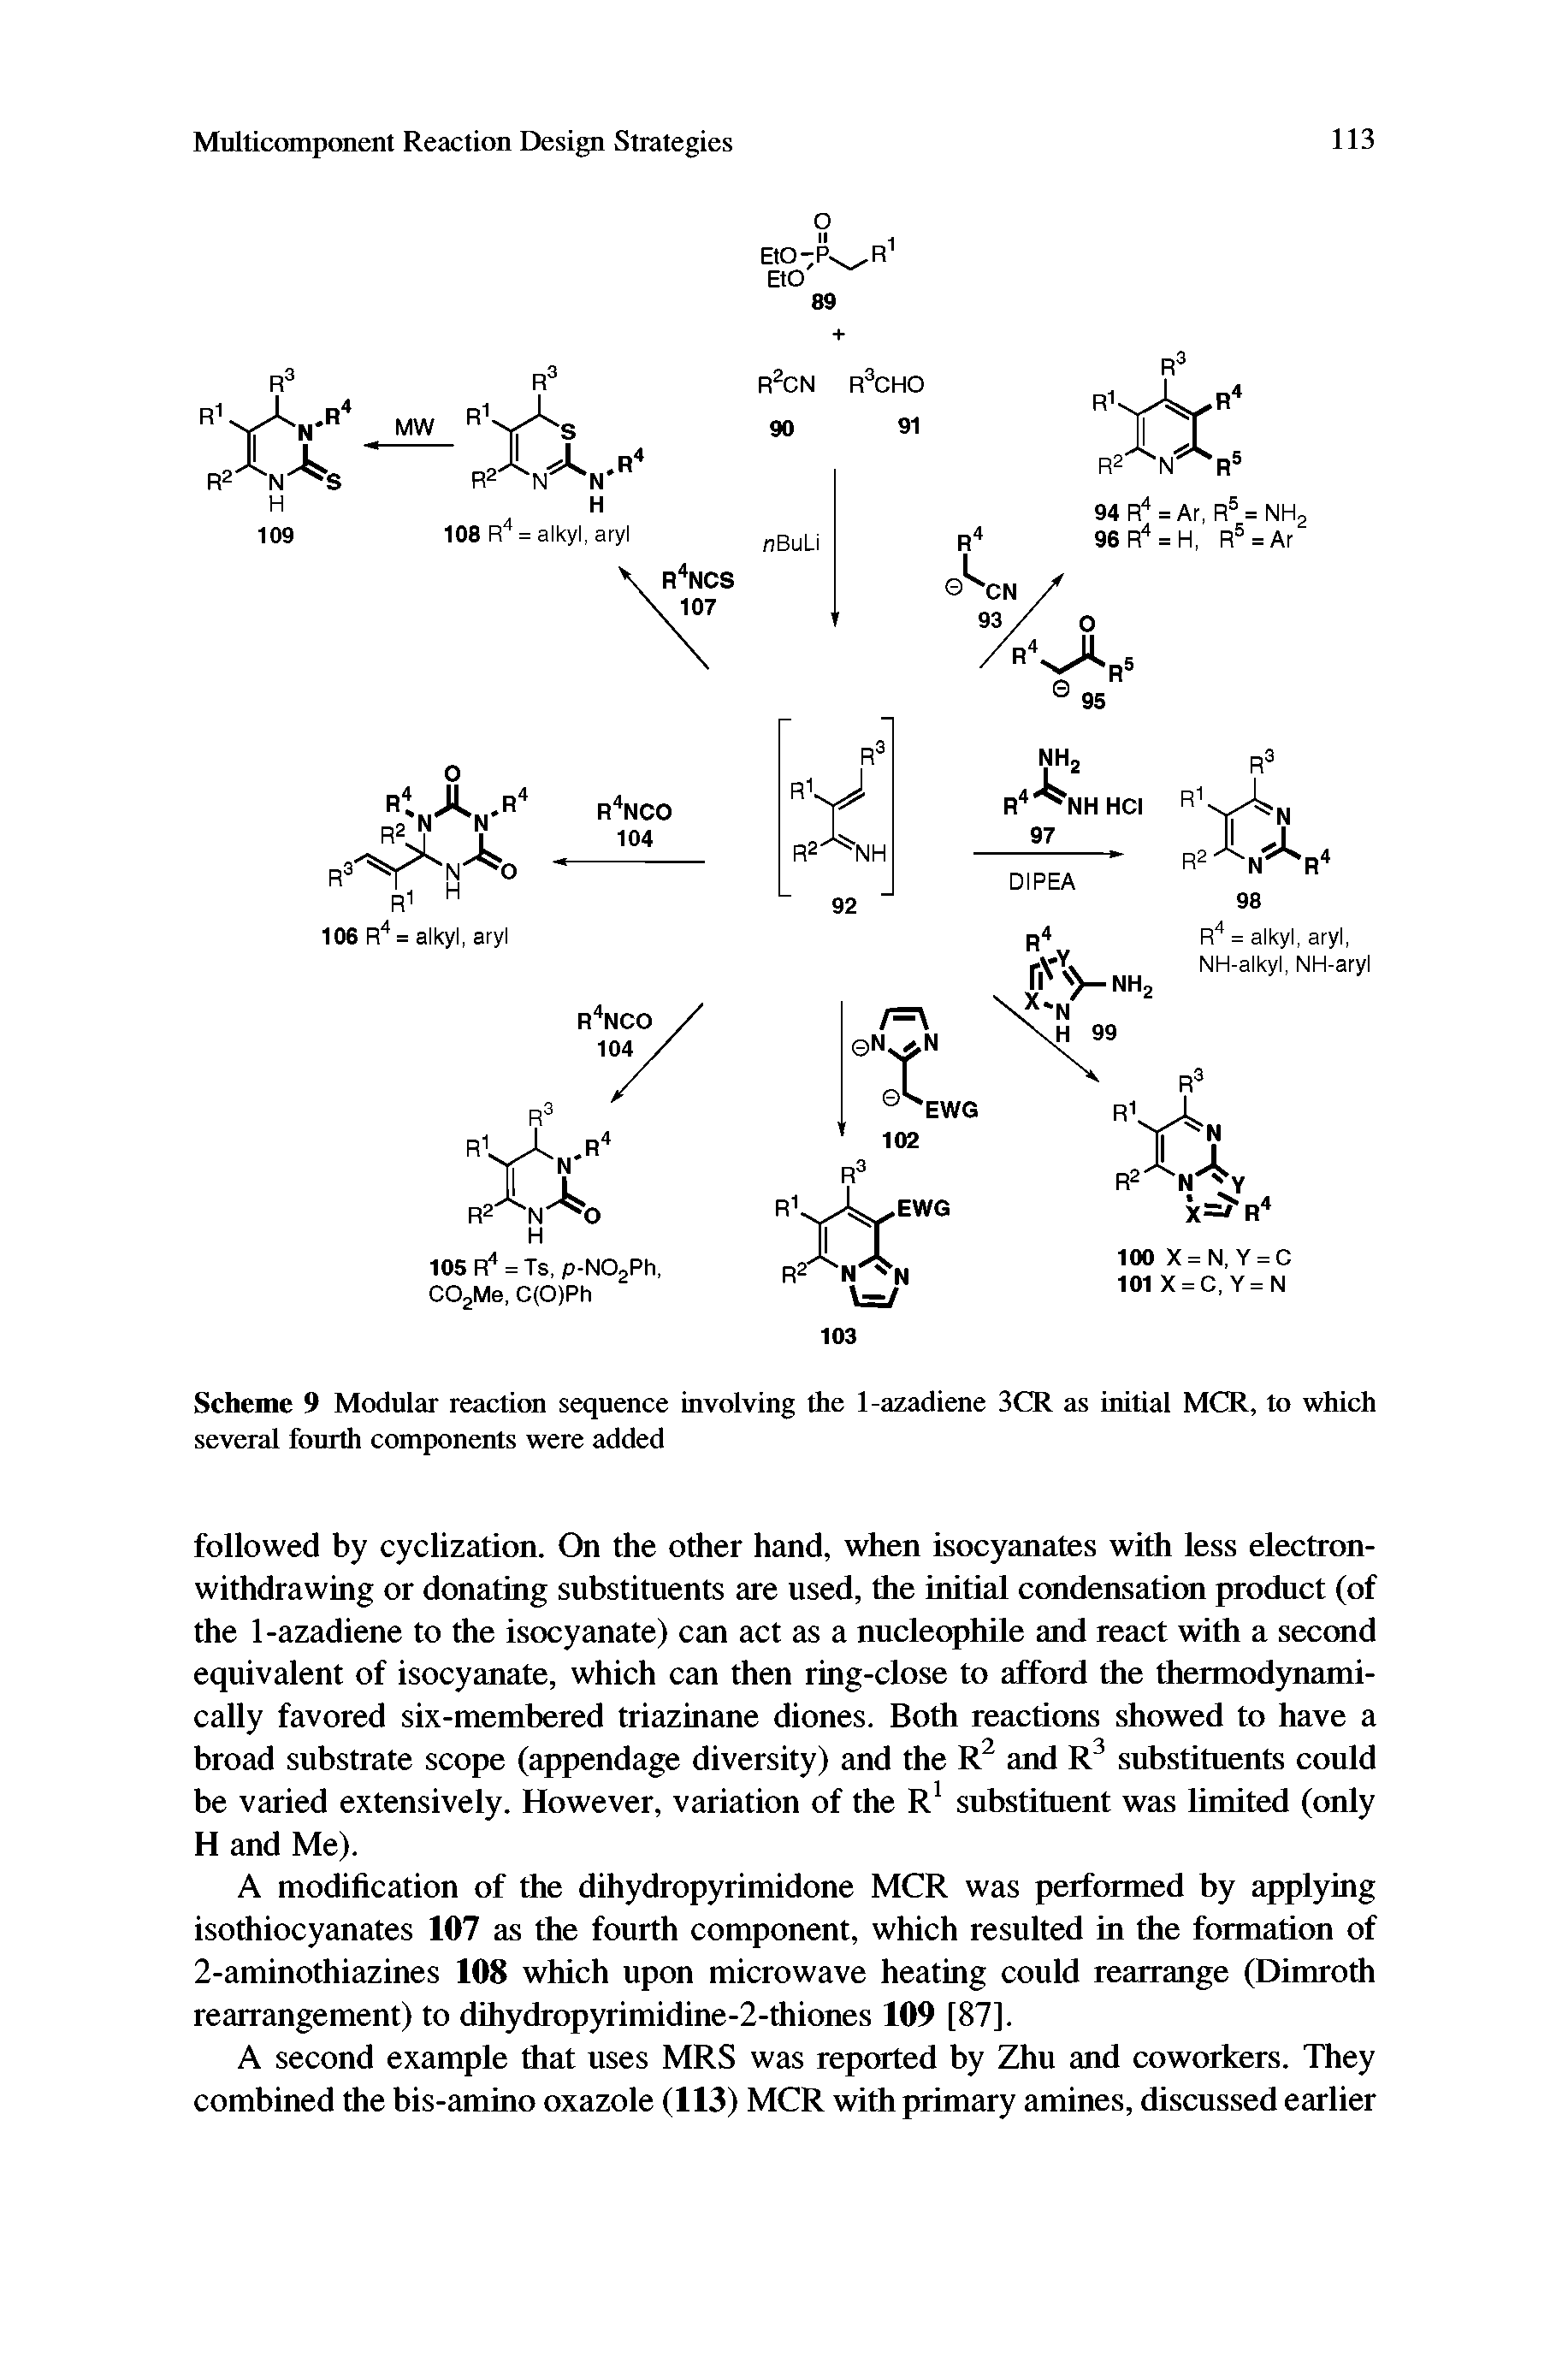 Scheme 9 Modular reaction sequence involving the 1-azadiene SCR as initial MCR, to which several fourth components were added...